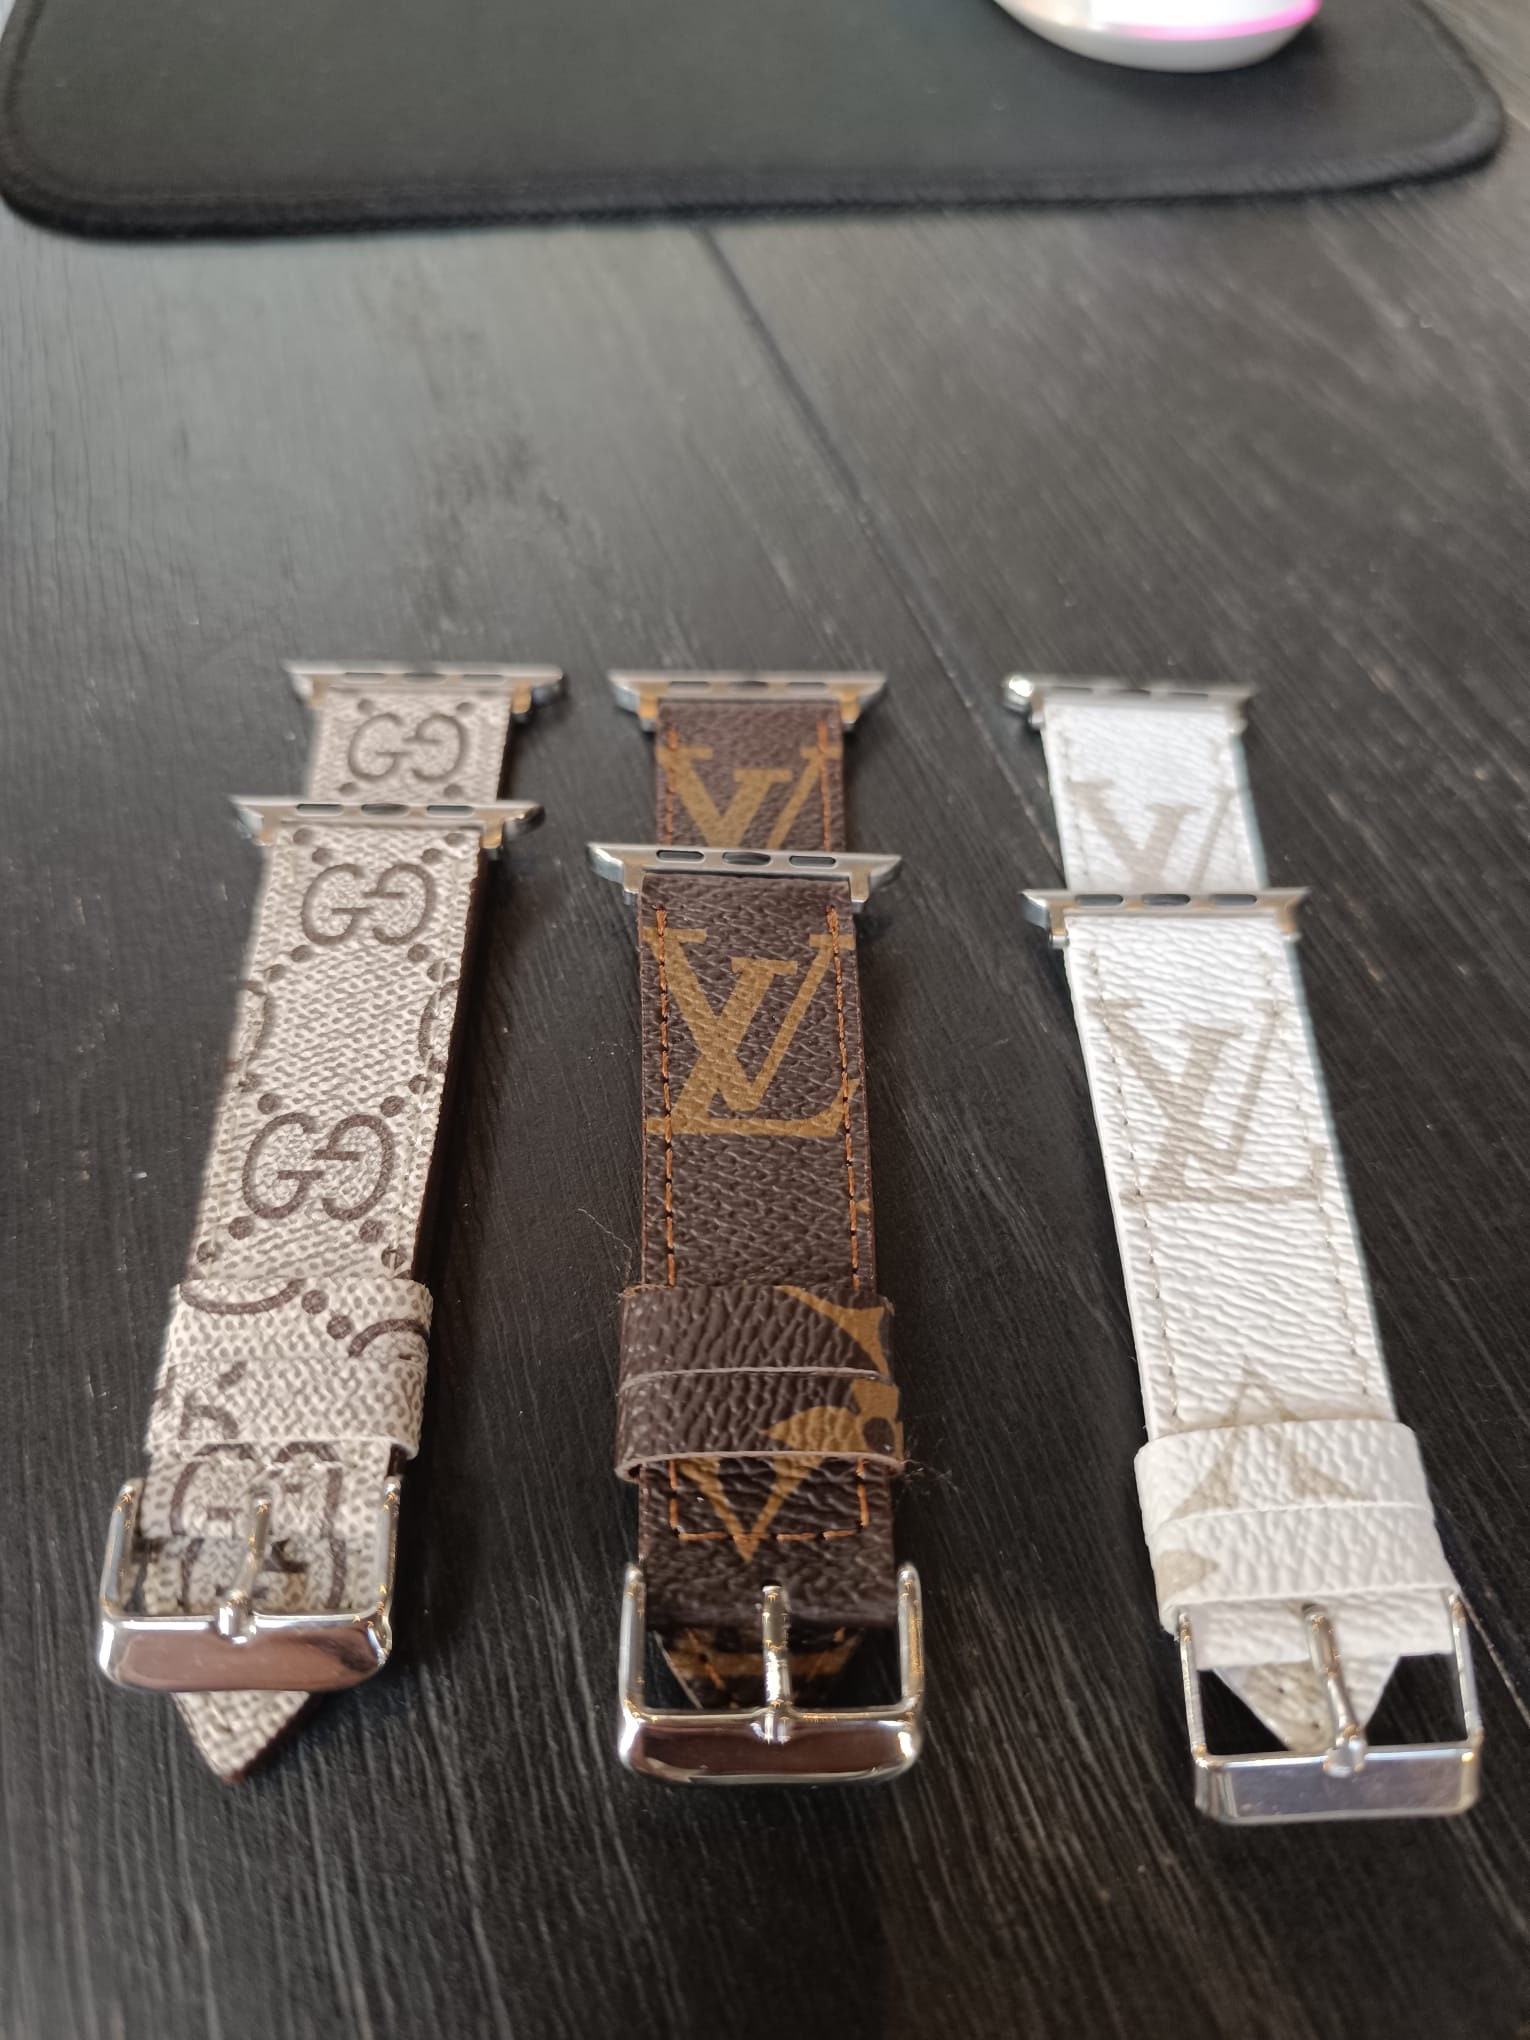 Custom 24K Gold Plated 41MM Apple Watch SERIES 8 Louis Vuitton Band LTE GPS  02